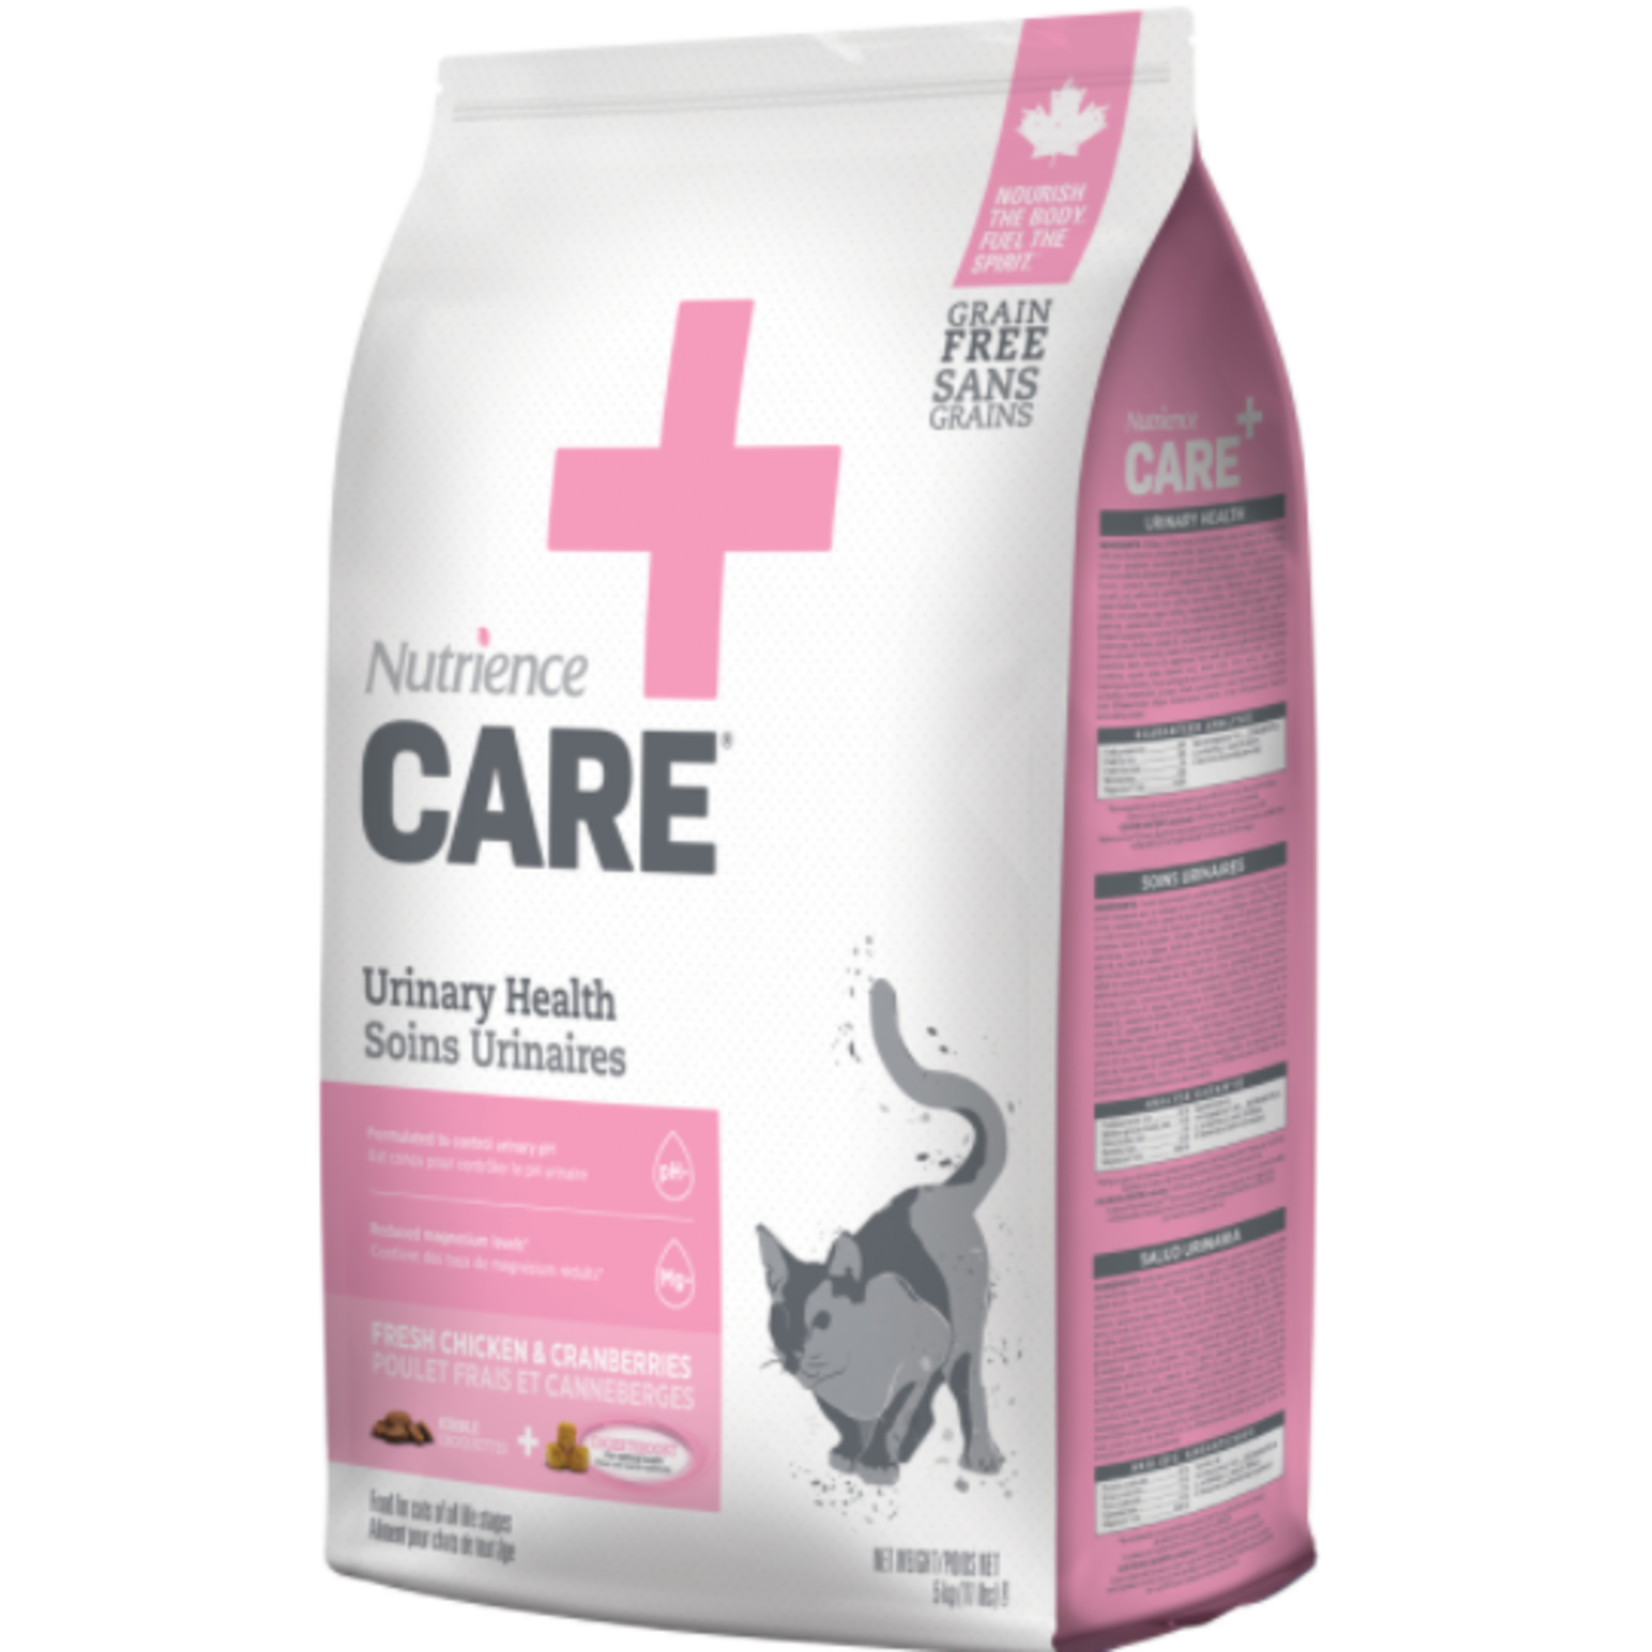 Nutrience Care Urinary Health for Cats - 11 lbs